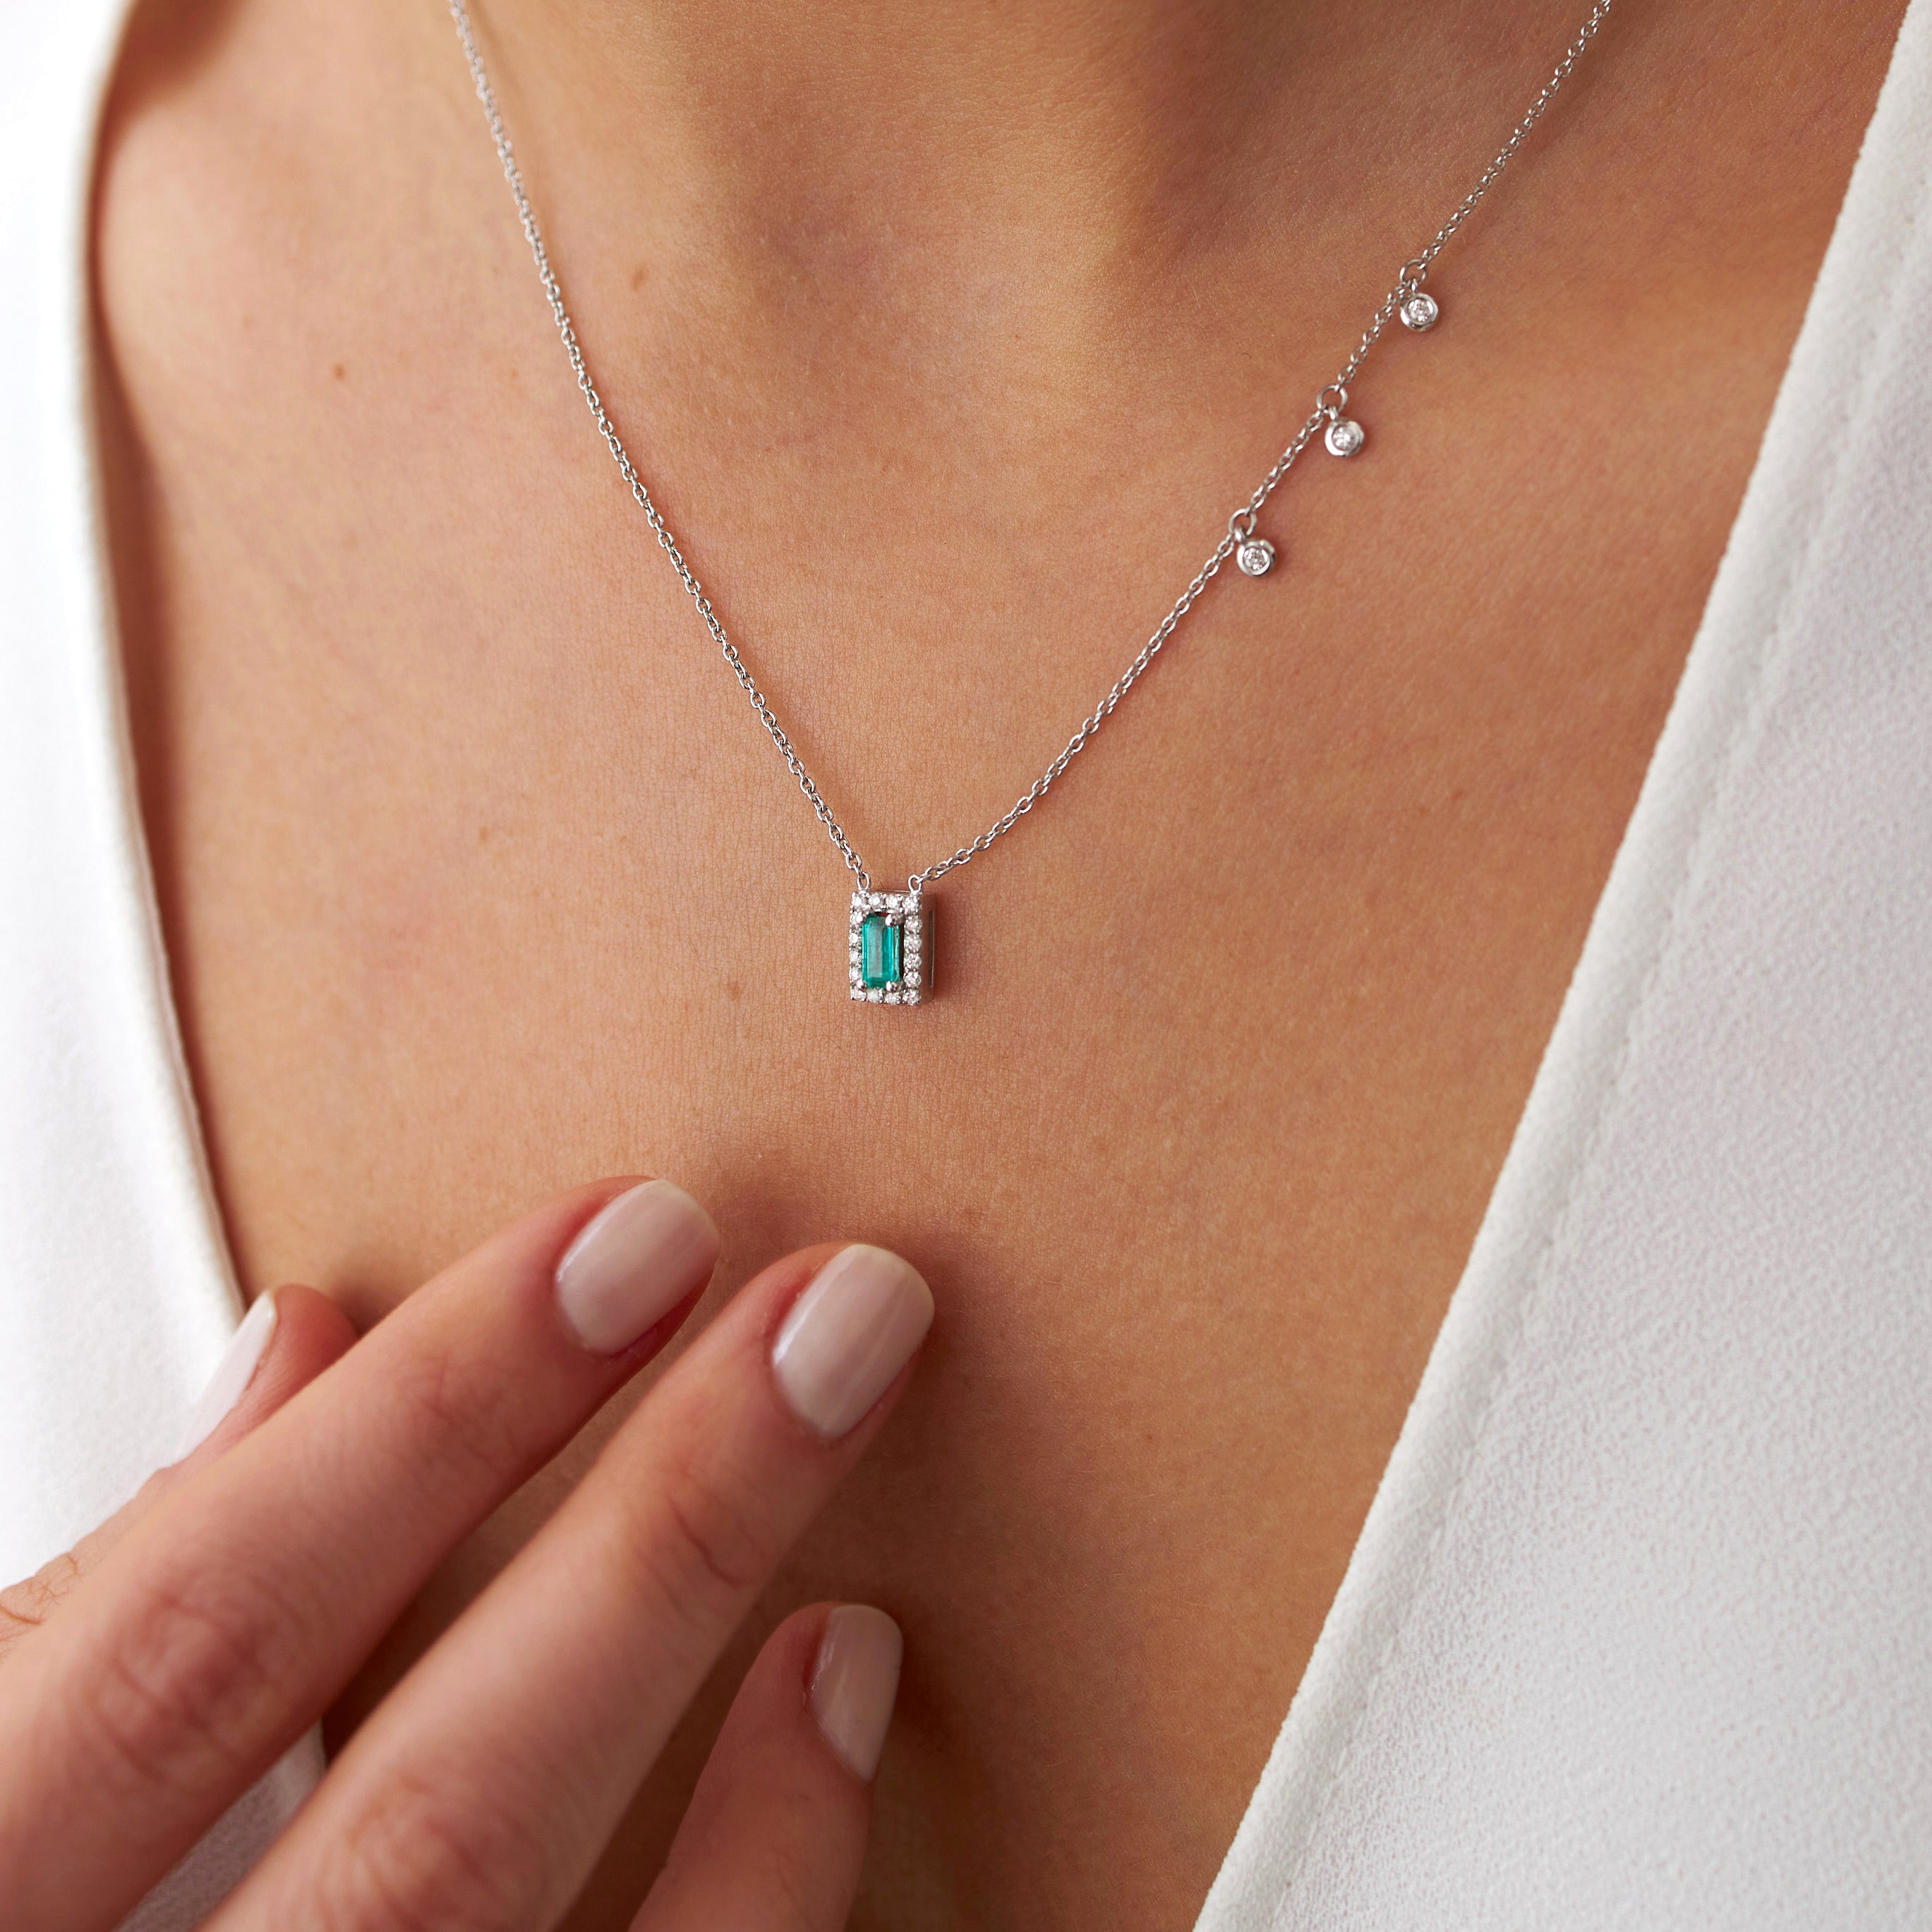 Asymmetric Emerald and Diamond Necklace Available in 14K and 18K Gold